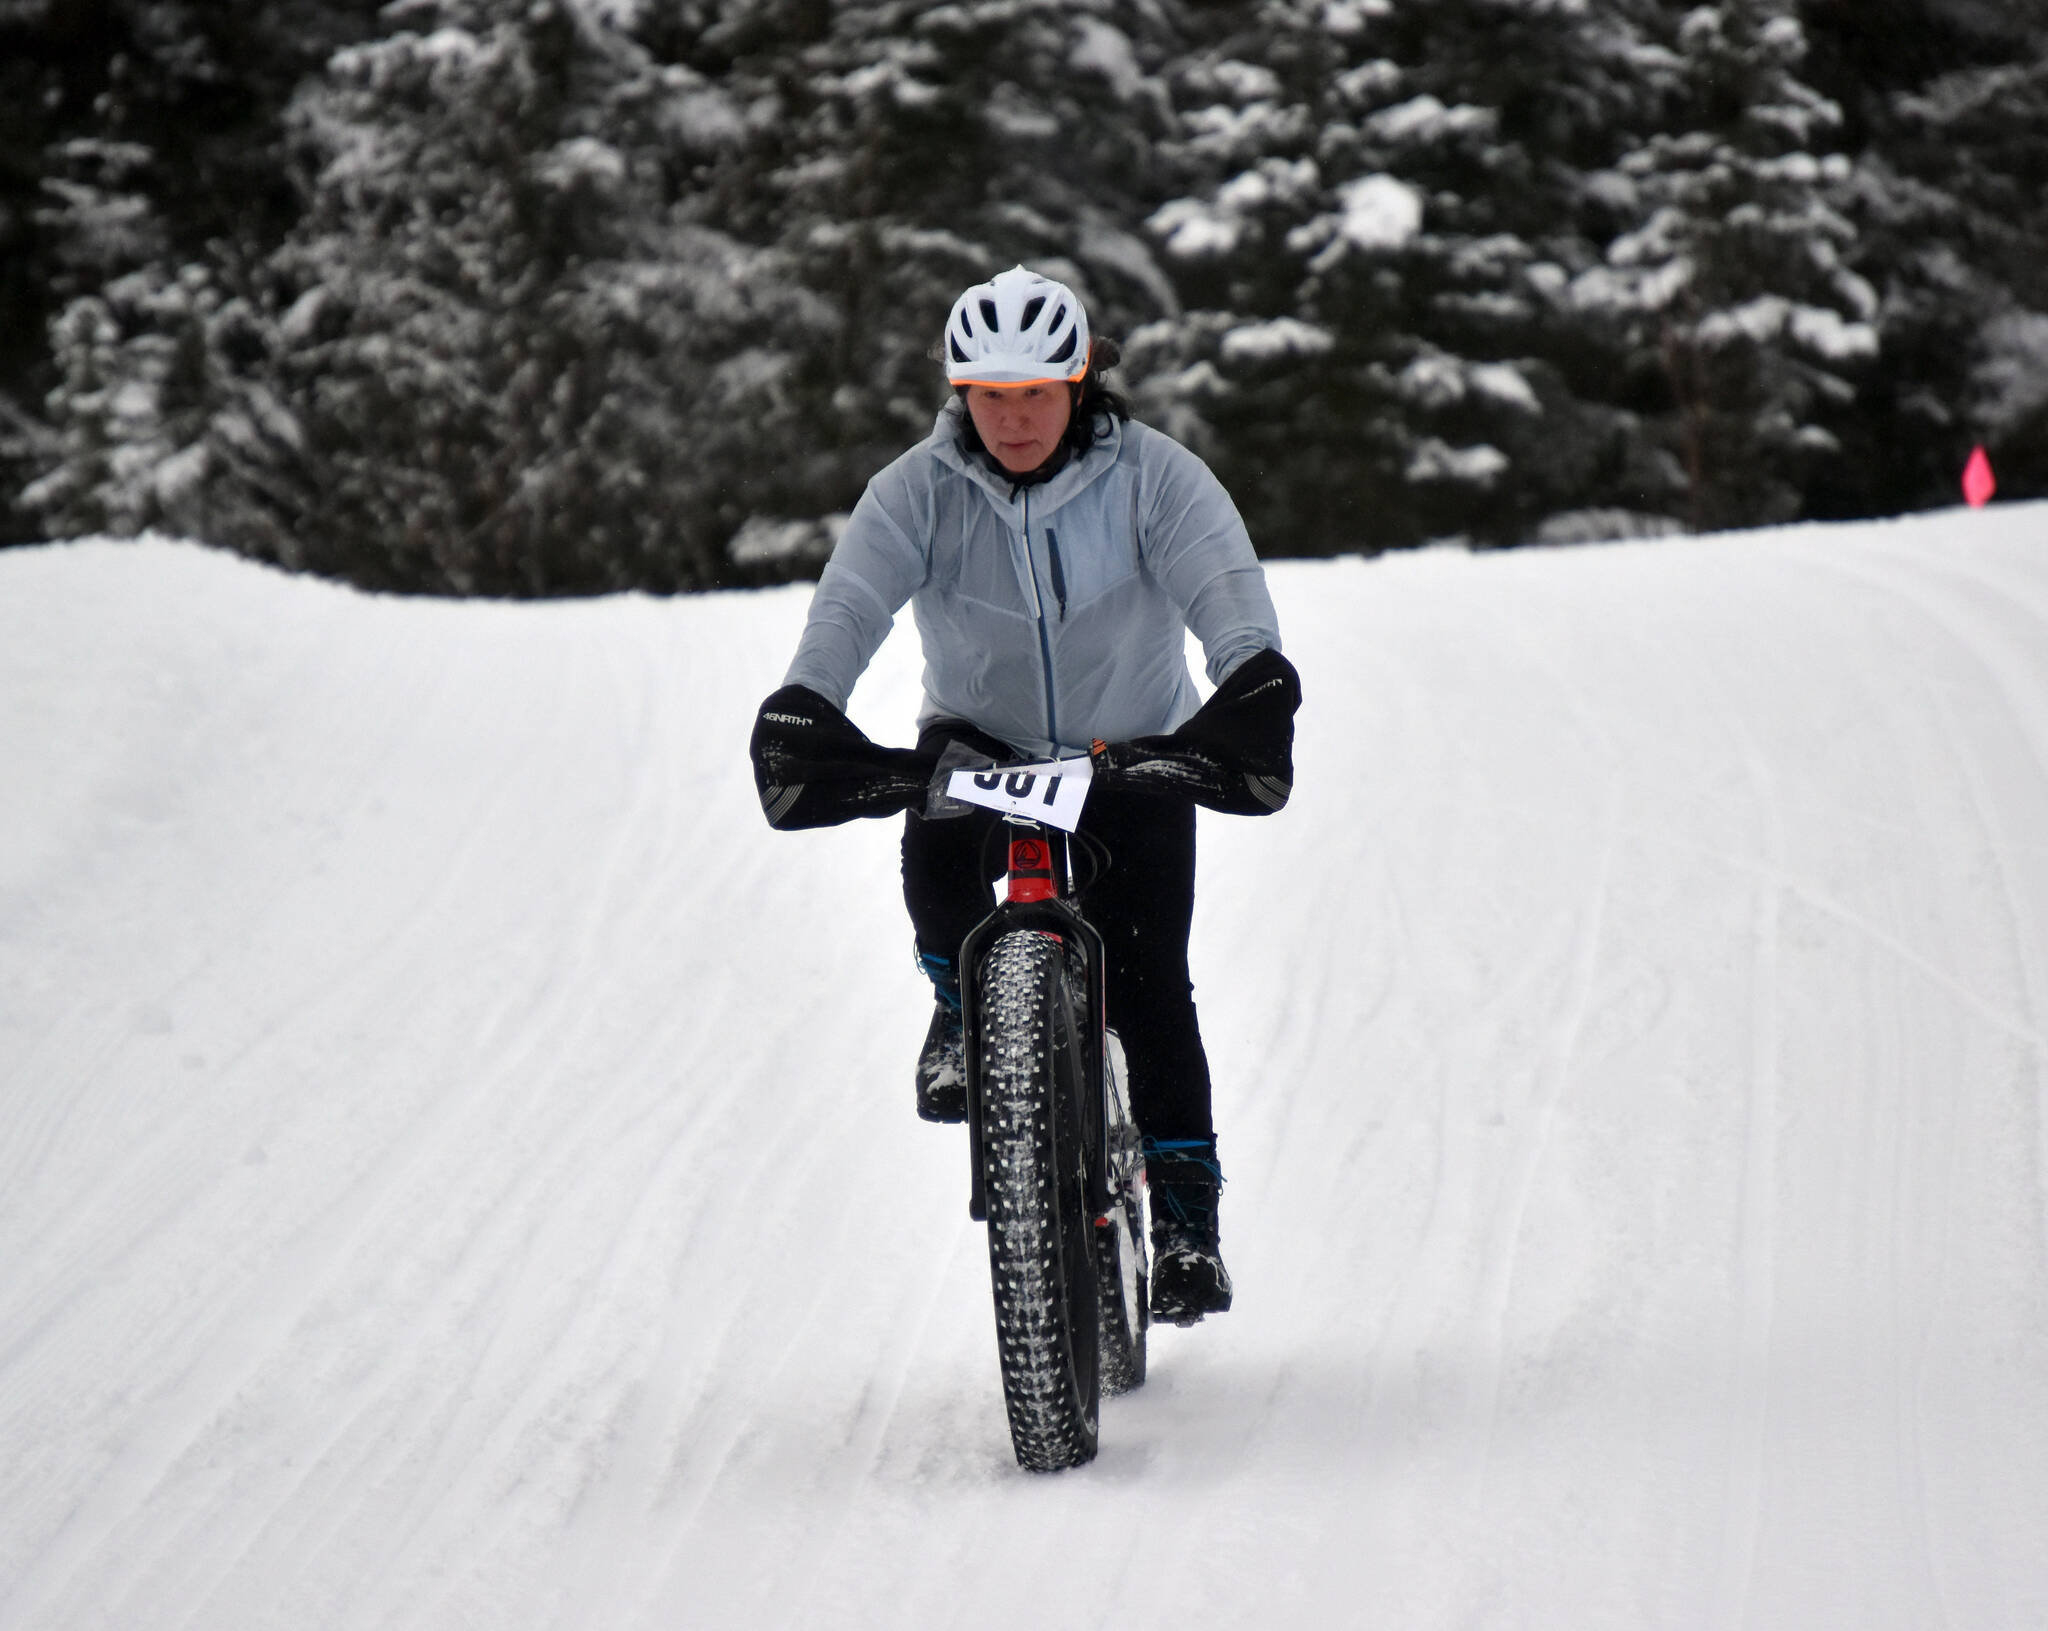 Rose Garner rides to victory in the 20-kilometer women’s fat bike Sunday, Feb. 19, 2023, at the 6th Annual Tour of Tsalteshi at Tsalteshi Trails just outside of Soldotna, Alaska. (Photo by Jeff Helminiak/Peninsula Clarion)